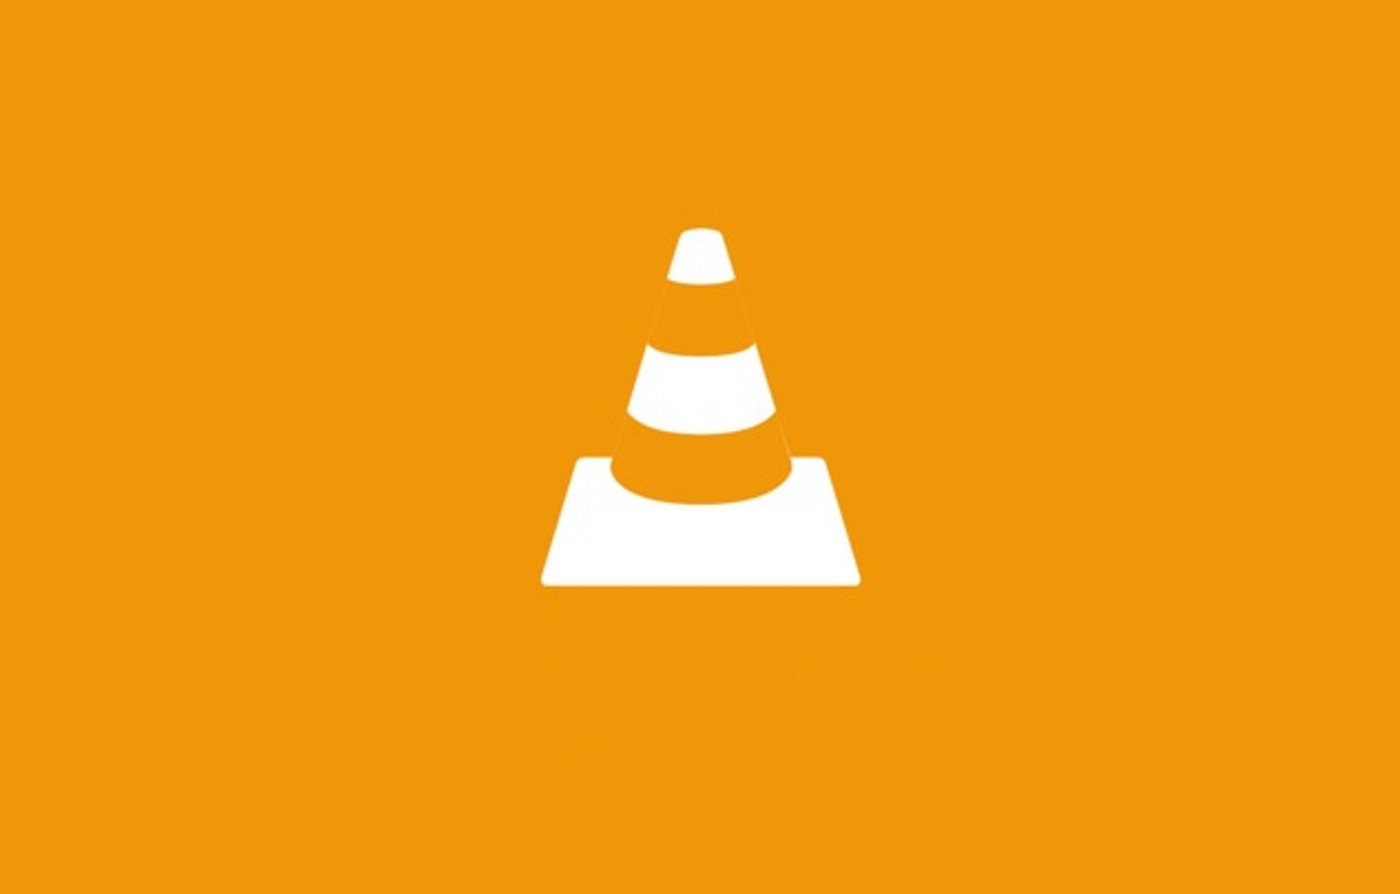 vlc download youtube mp3